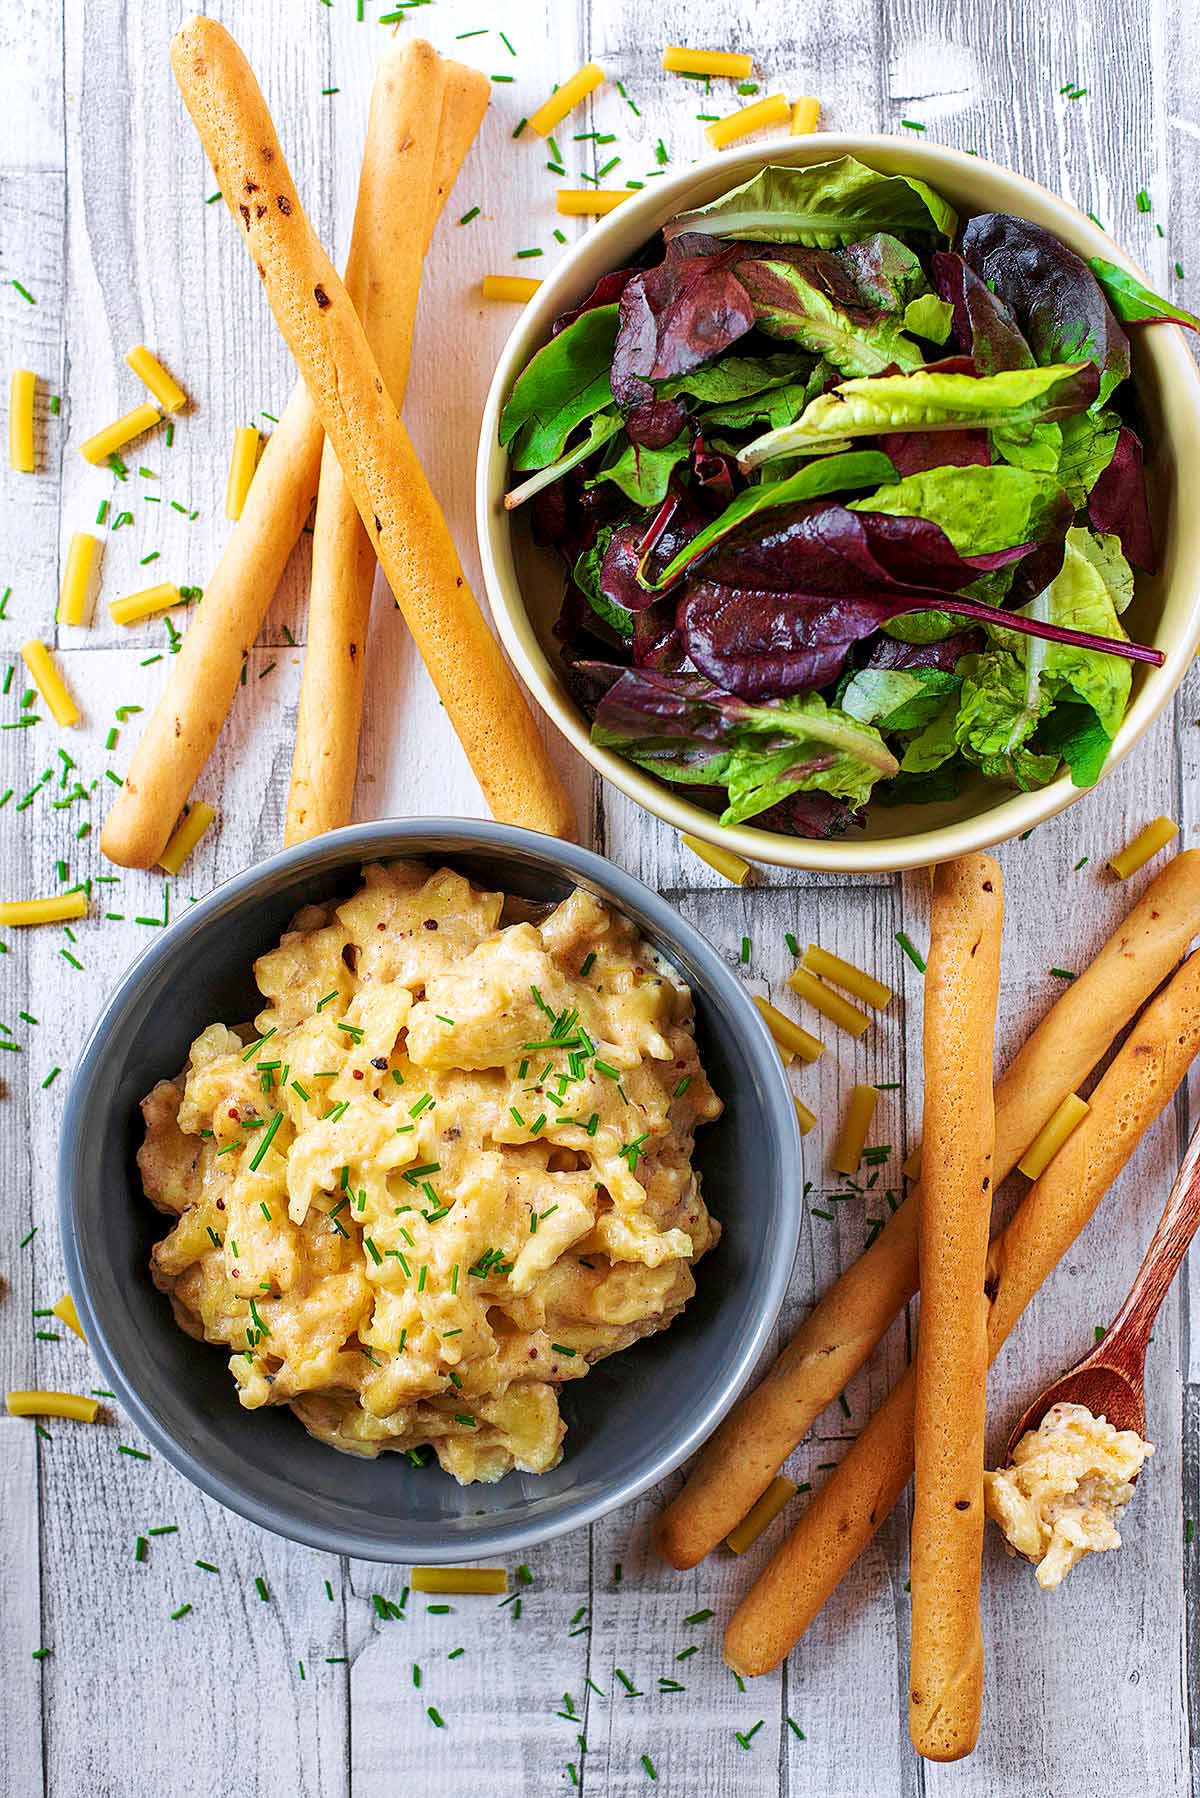 A bowl of mac and cheese next to a bowl of salad leaves and some bread sticks.